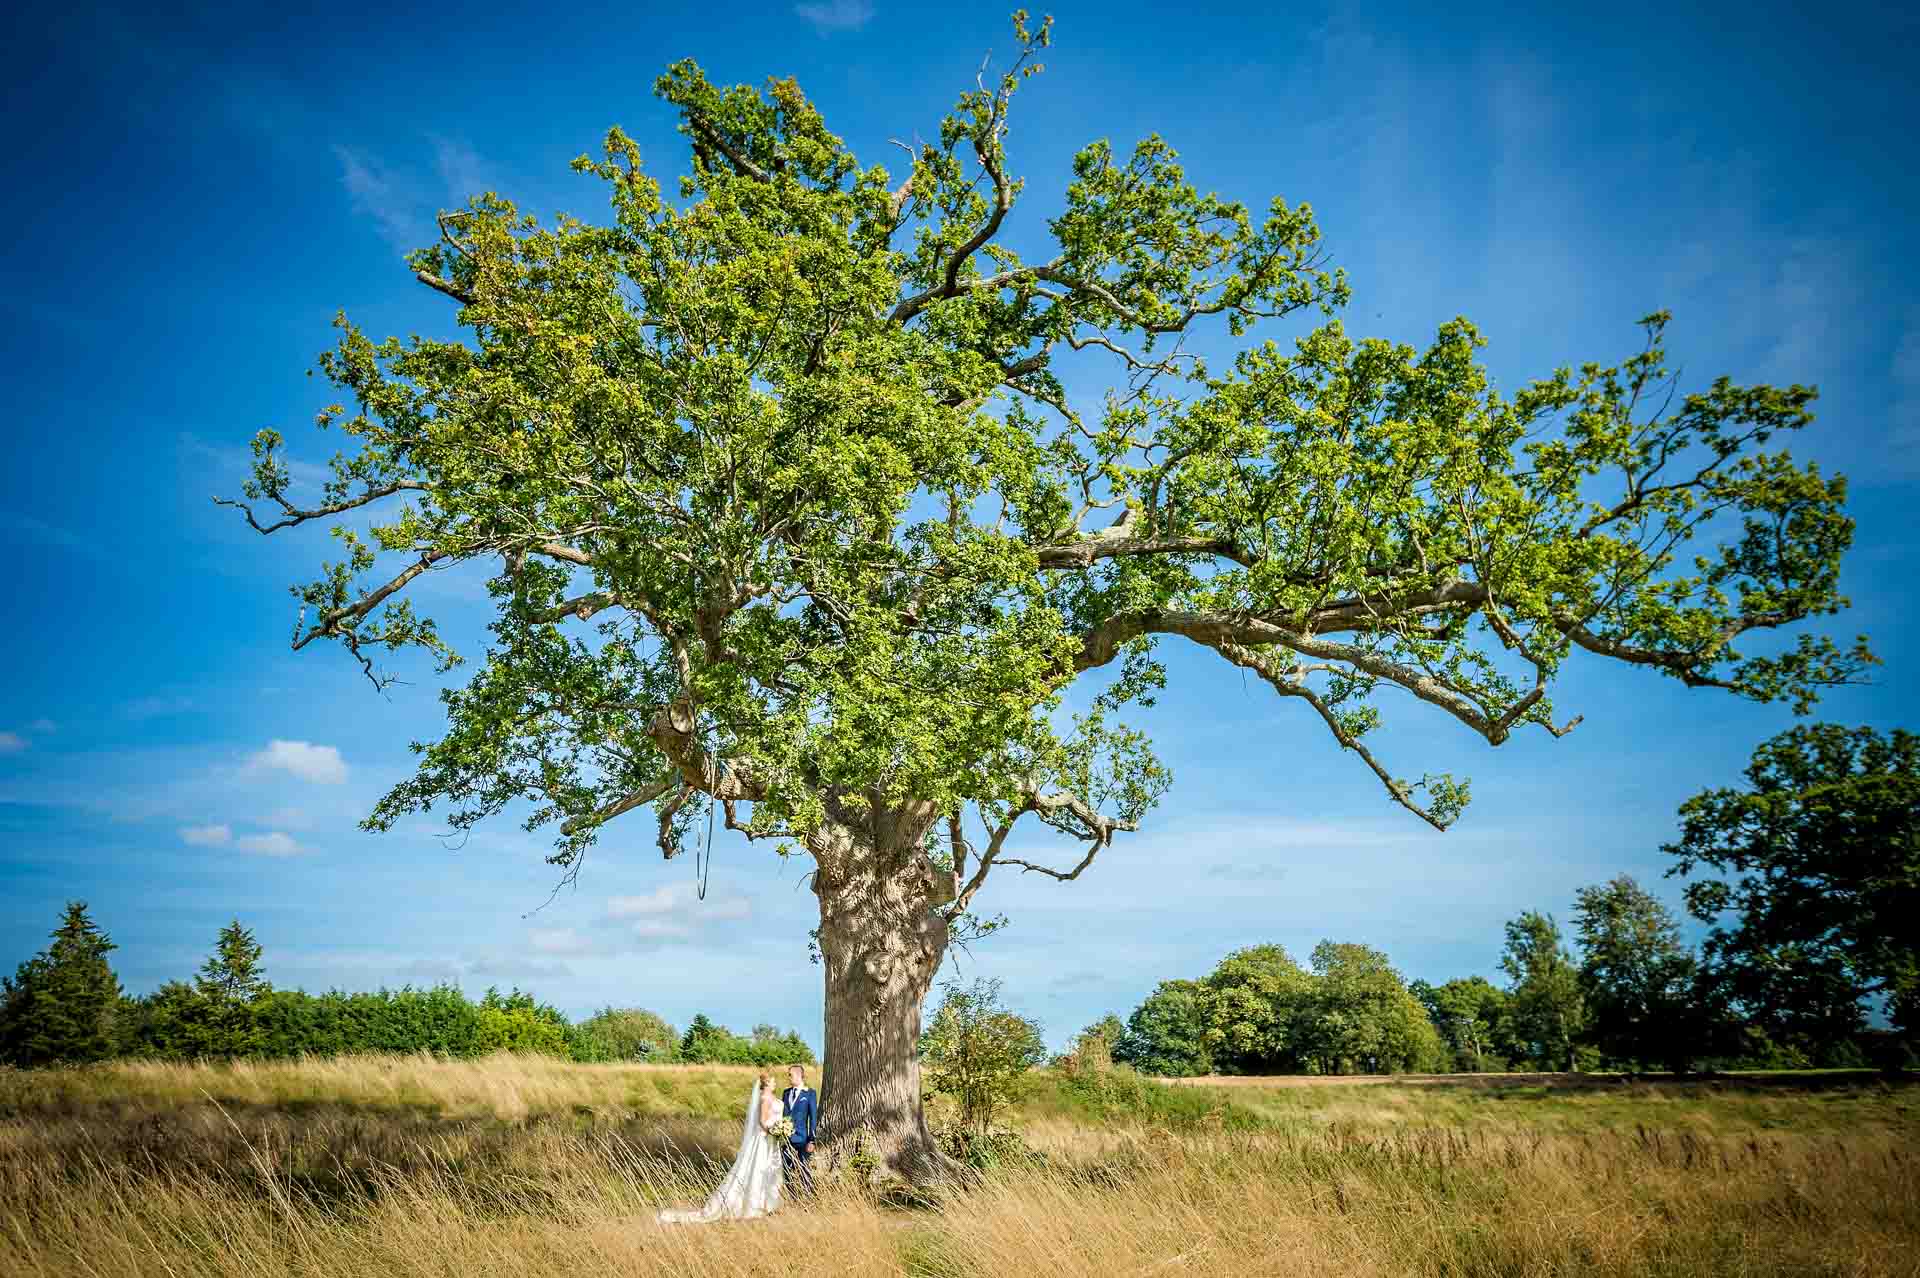 Bride and Groom standing underneath large tree in sunshine for wedding portrait